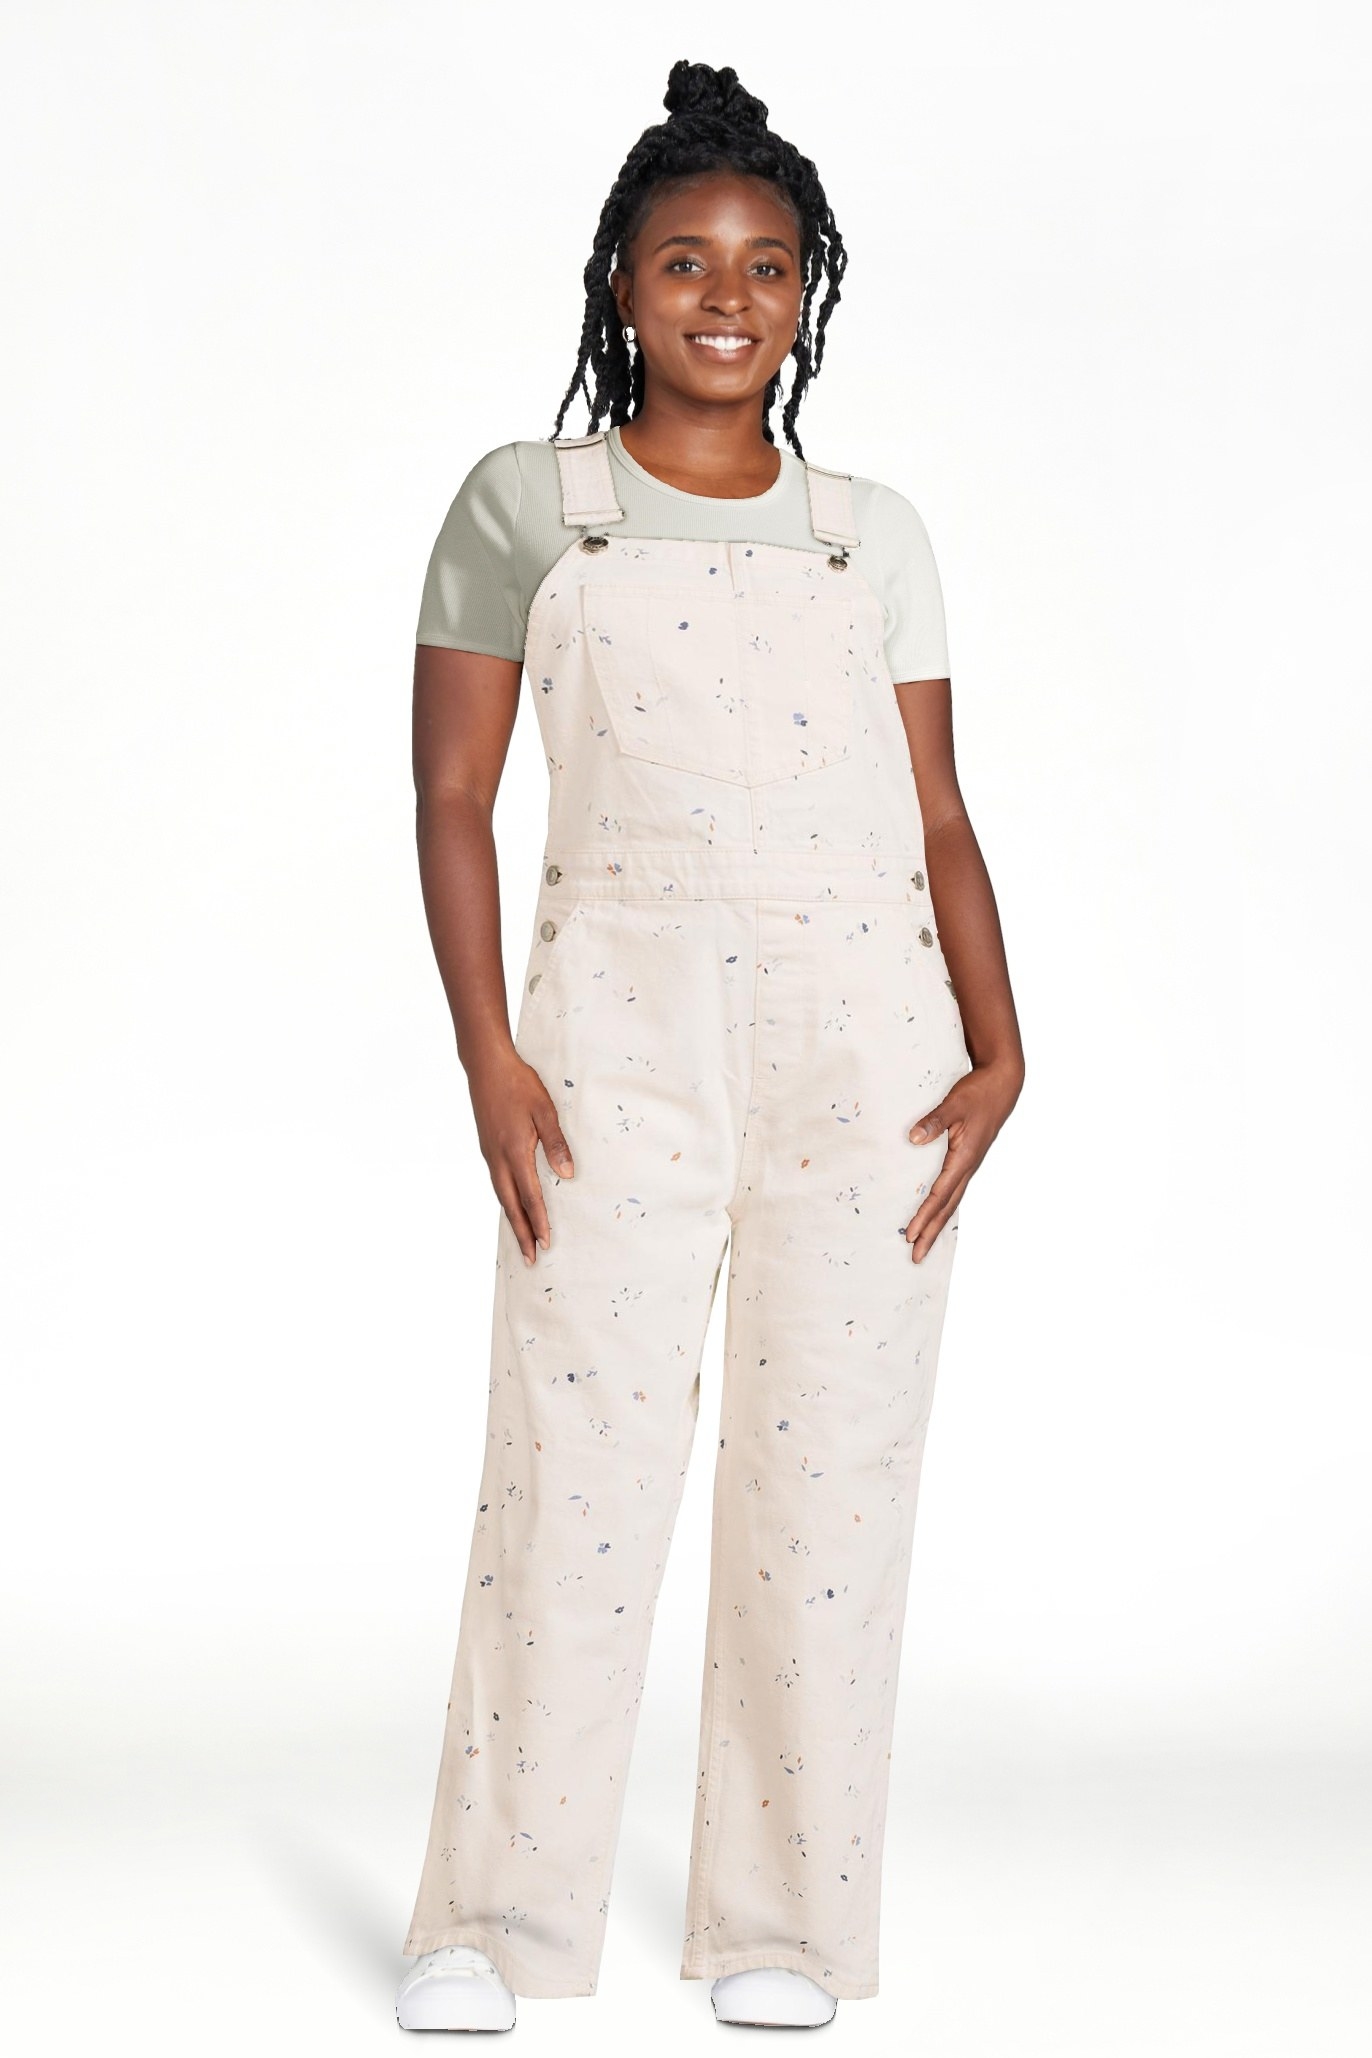 Model wearing white overalls with colorful details